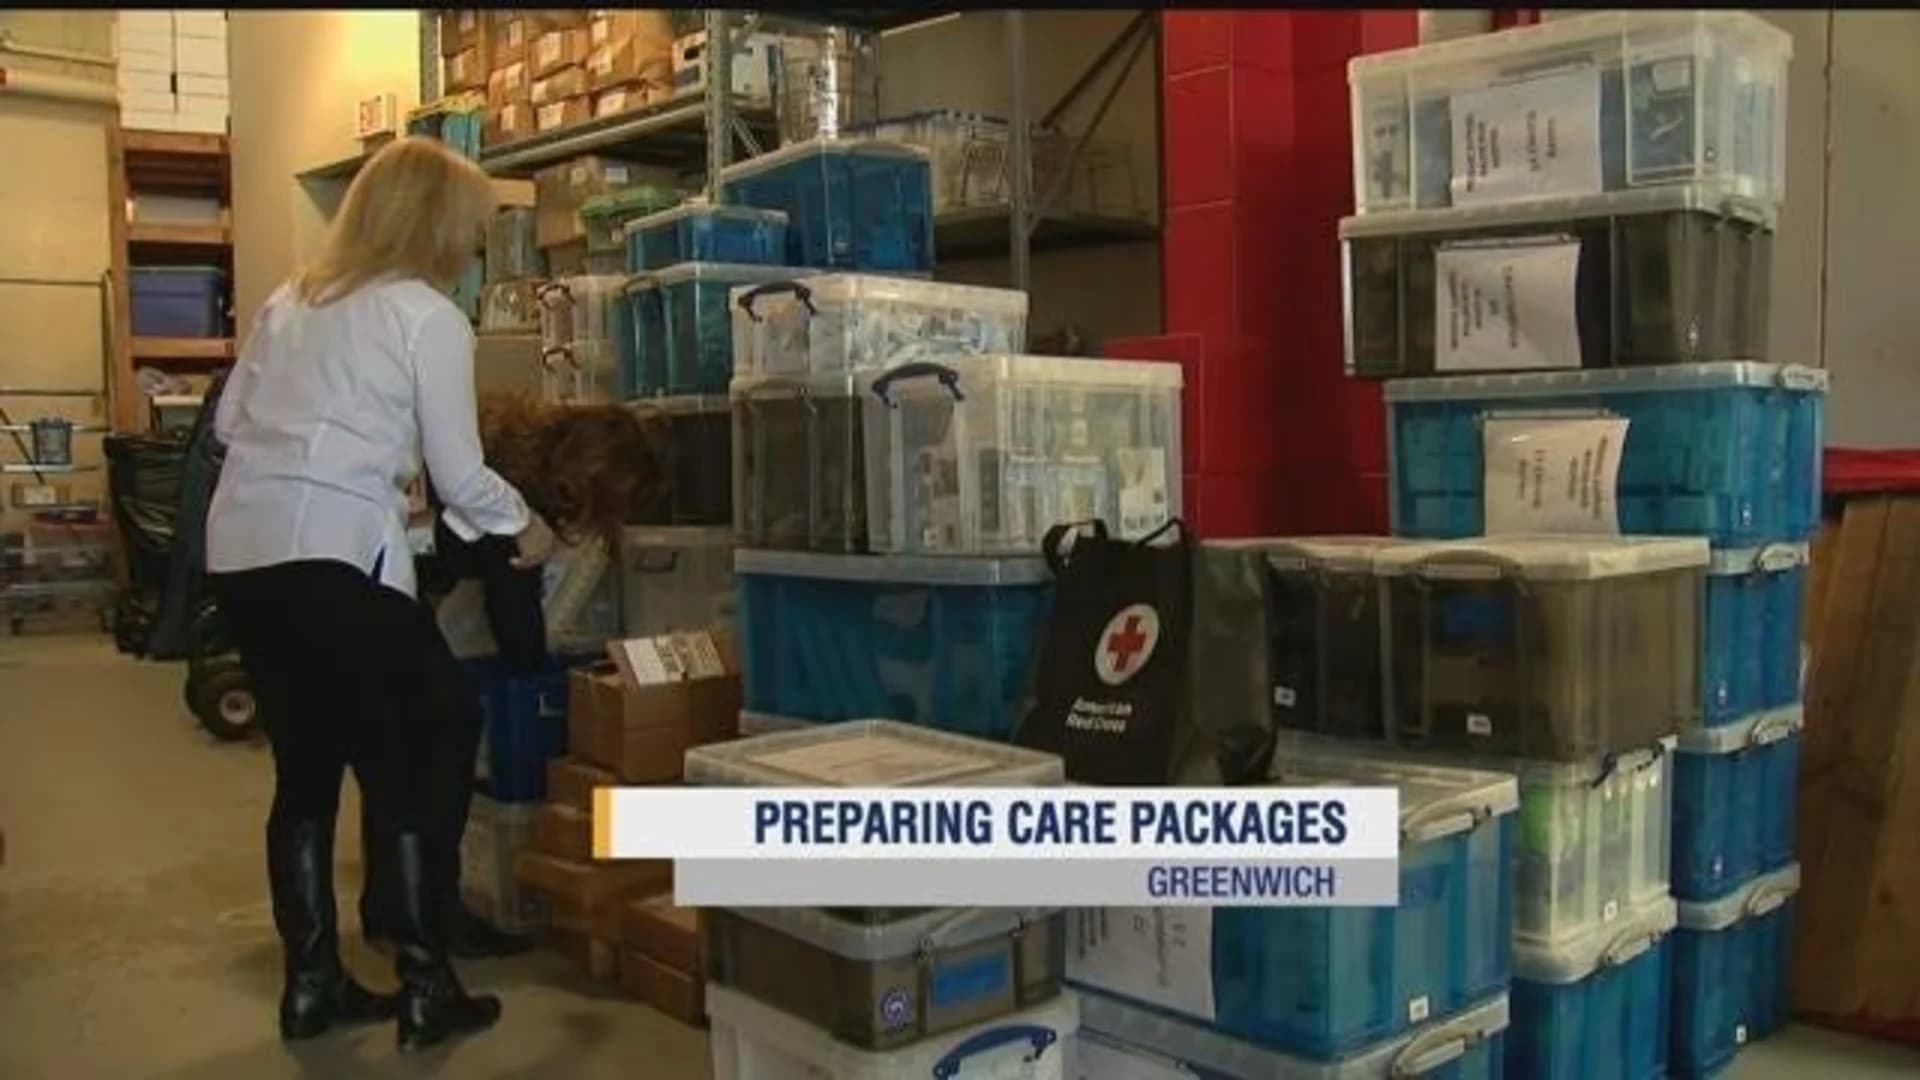 American Red Cross in Greenwich donates supplies to wounded veterans